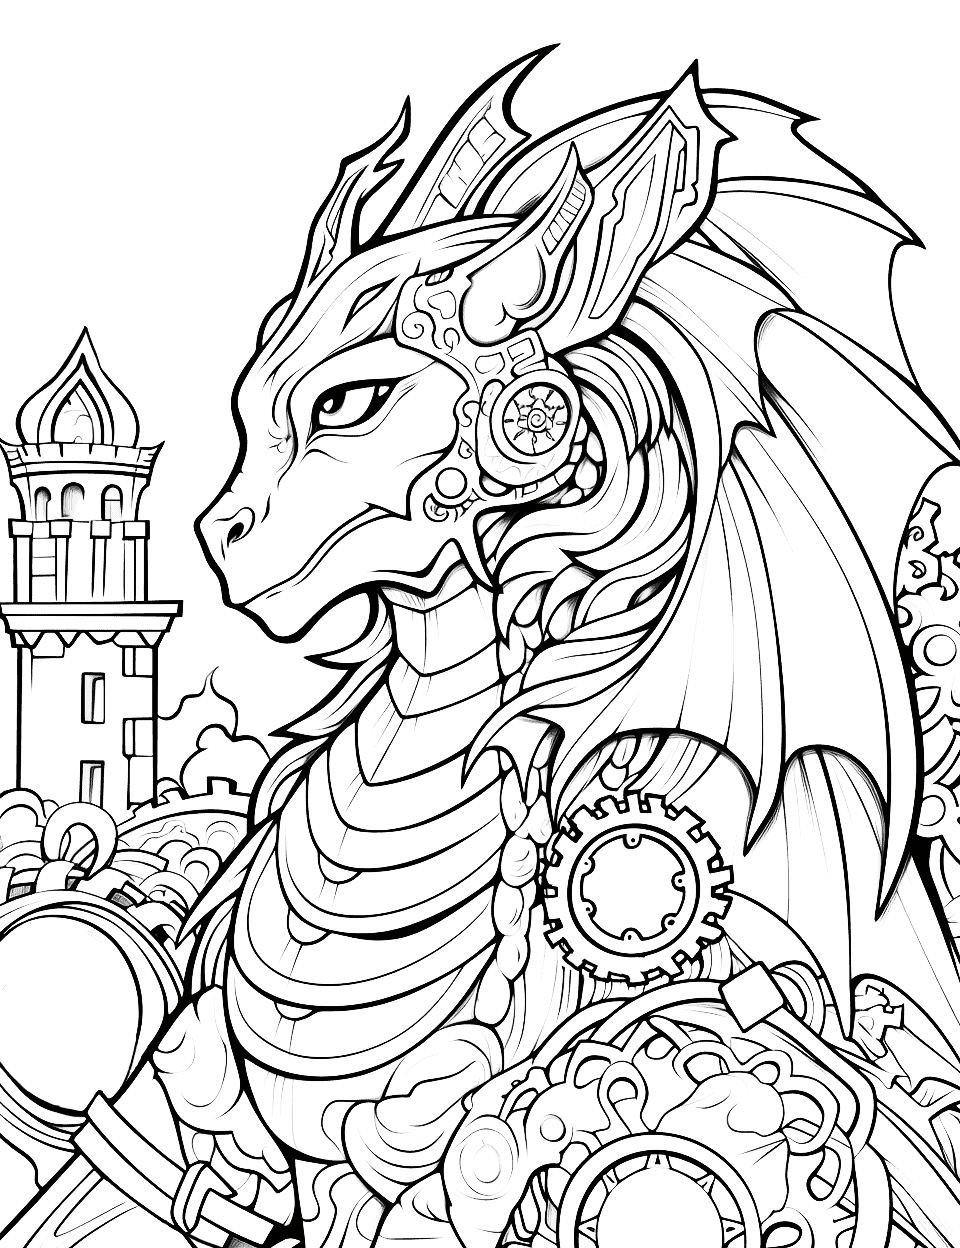 Steampunk Dragon's Adventure Adult Coloring Page - A detailed scene of a steampunk dragon on an adventure featuring mechanical landscapes and a steam-powered atmosphere.